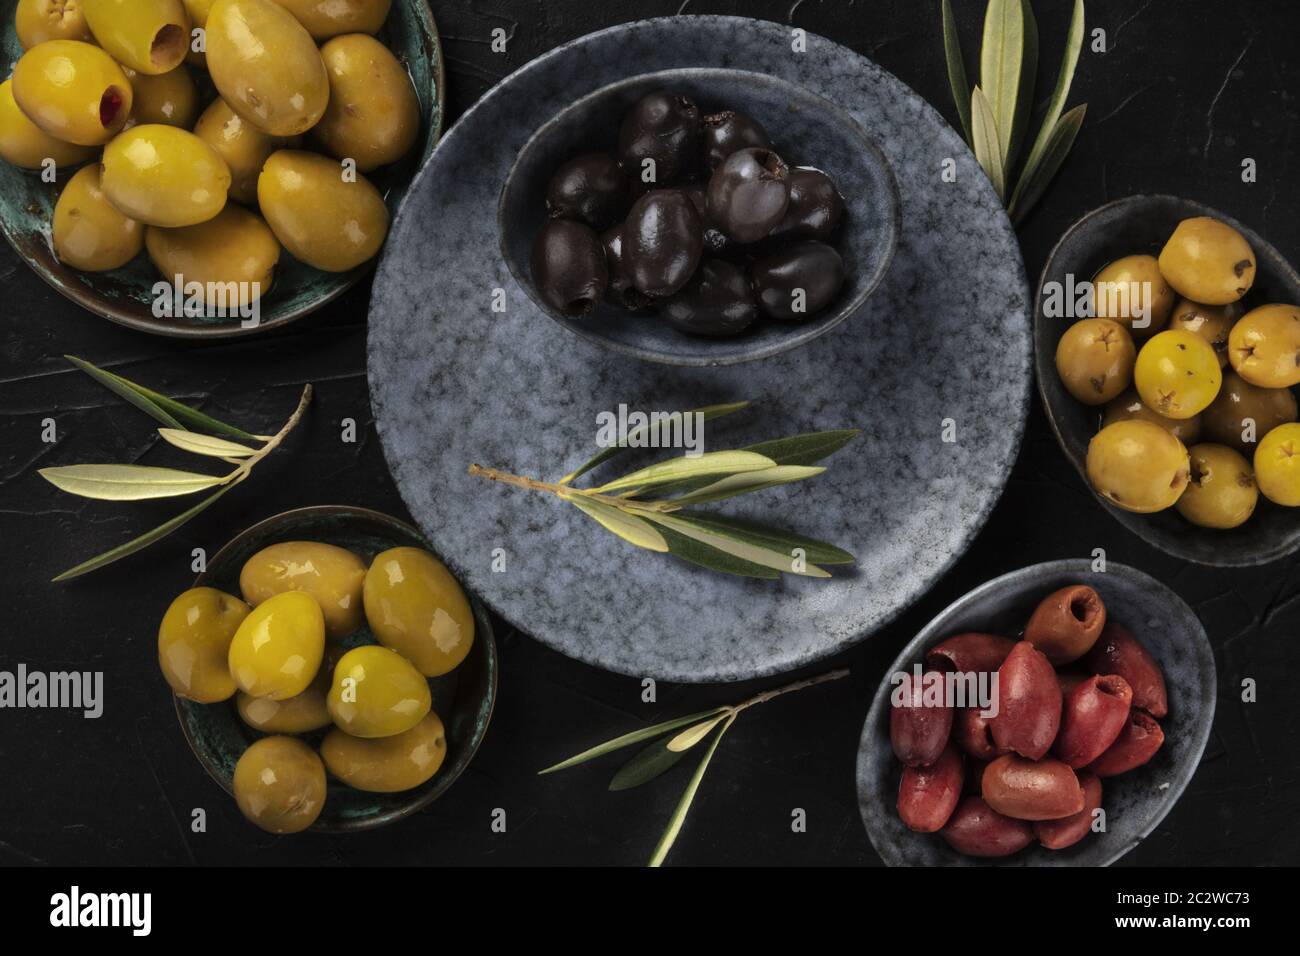 Olives variety, a flat lay. Black, green and red olives, shot from the top on a dark background Stock Photo